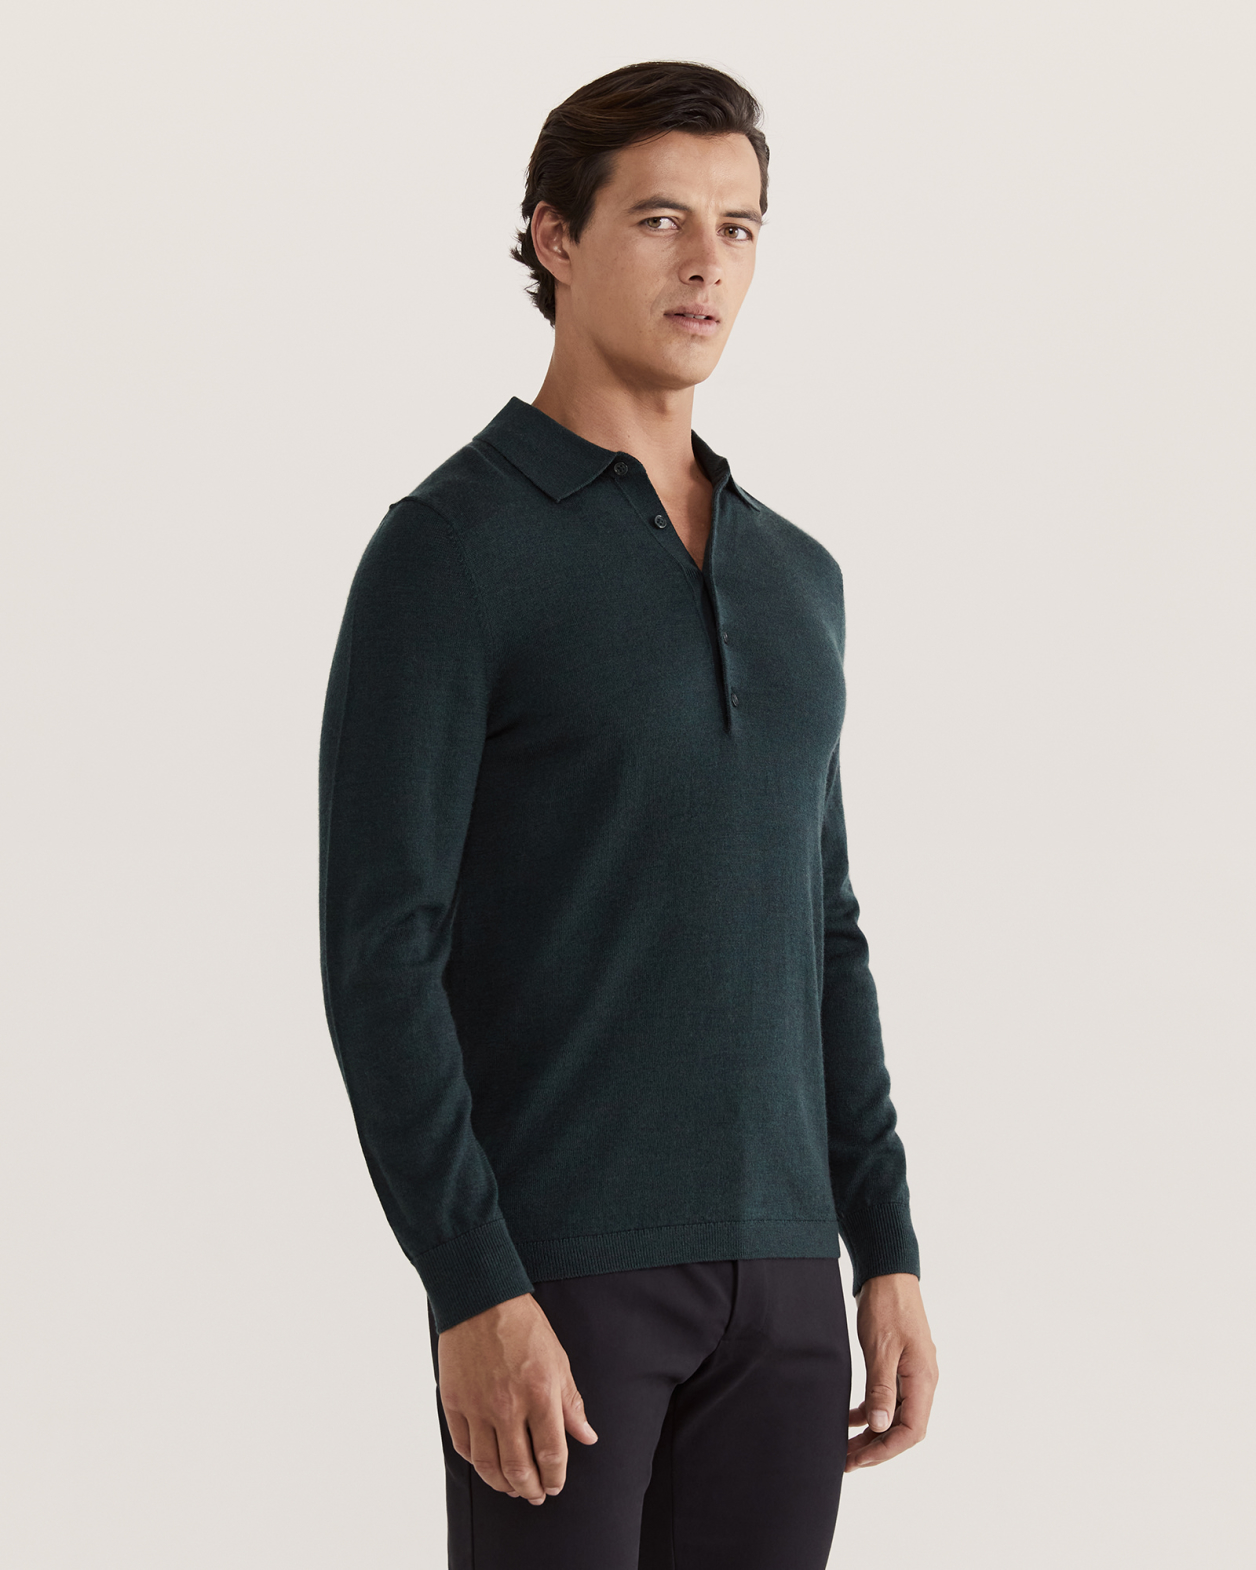 Franklin Long Sleeve Wool Polo in OLIVE